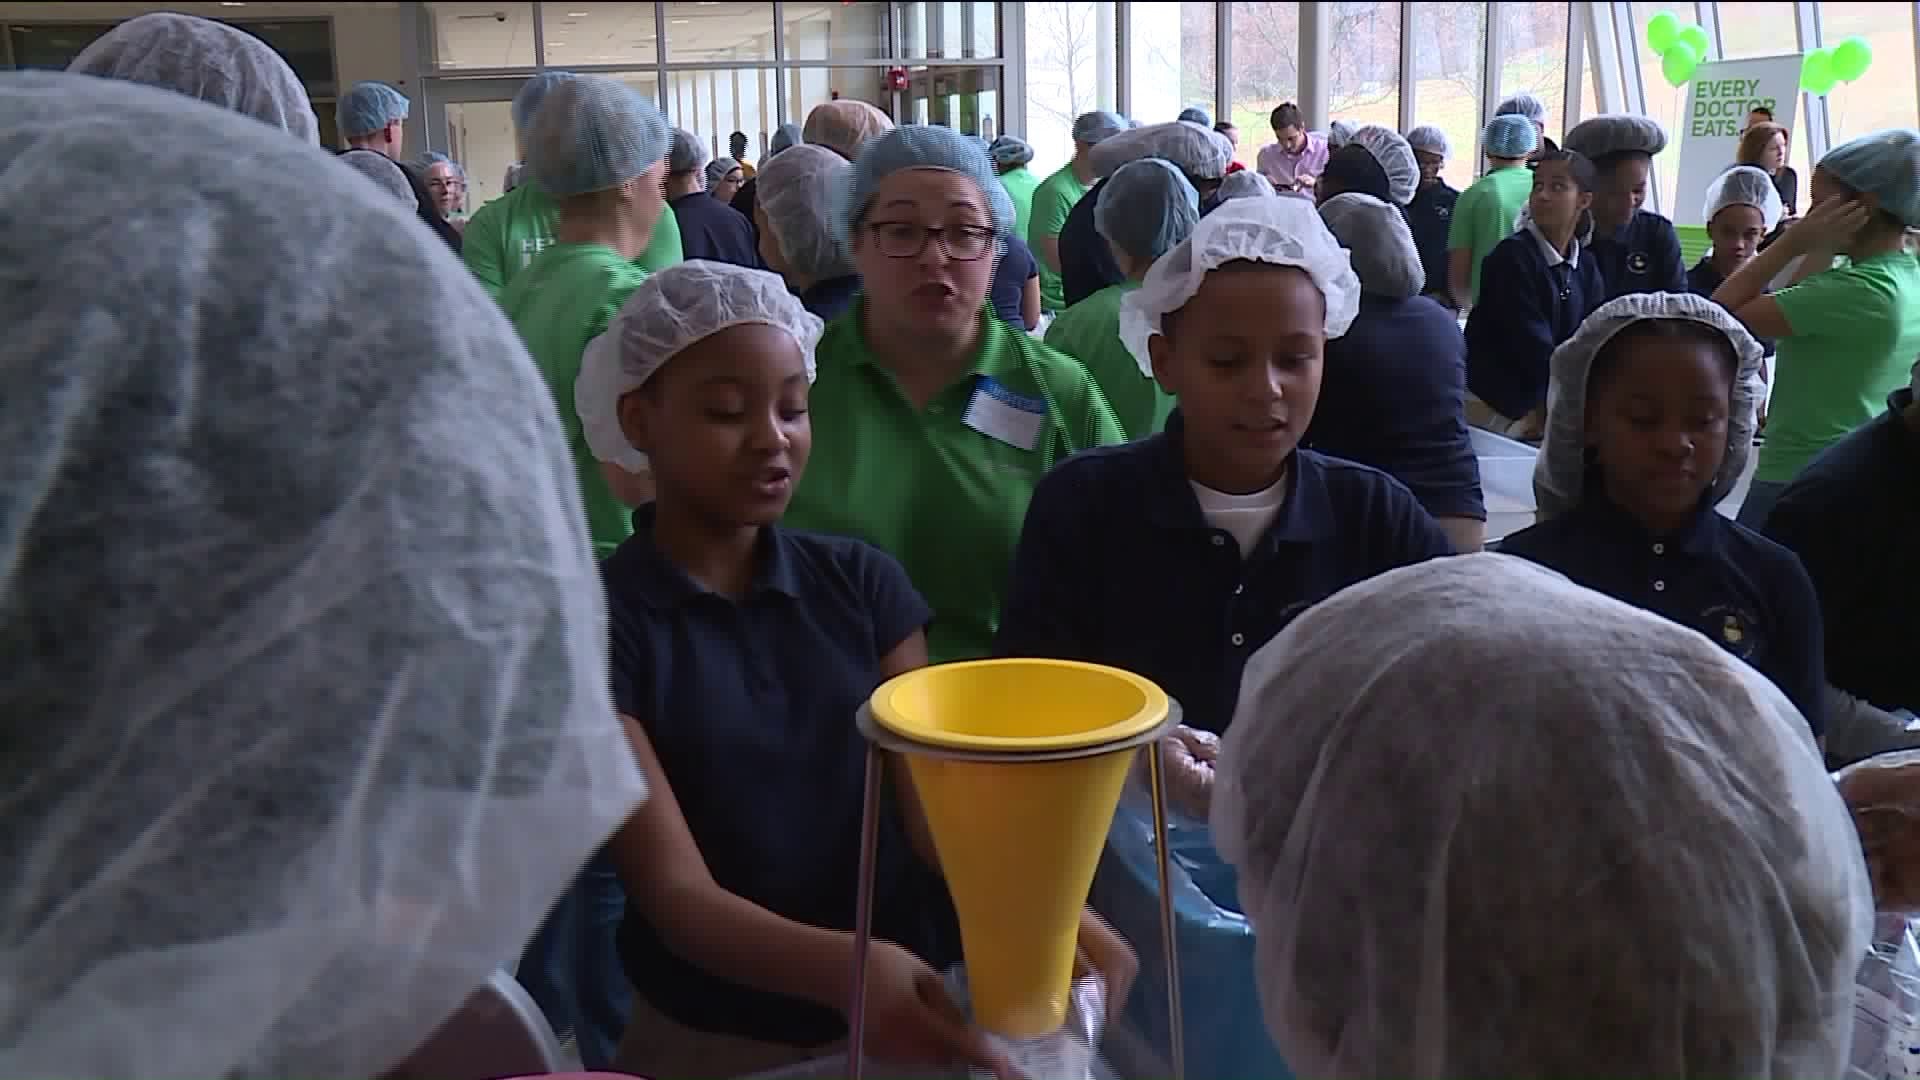 Hartford students on a mission to feed the hungry